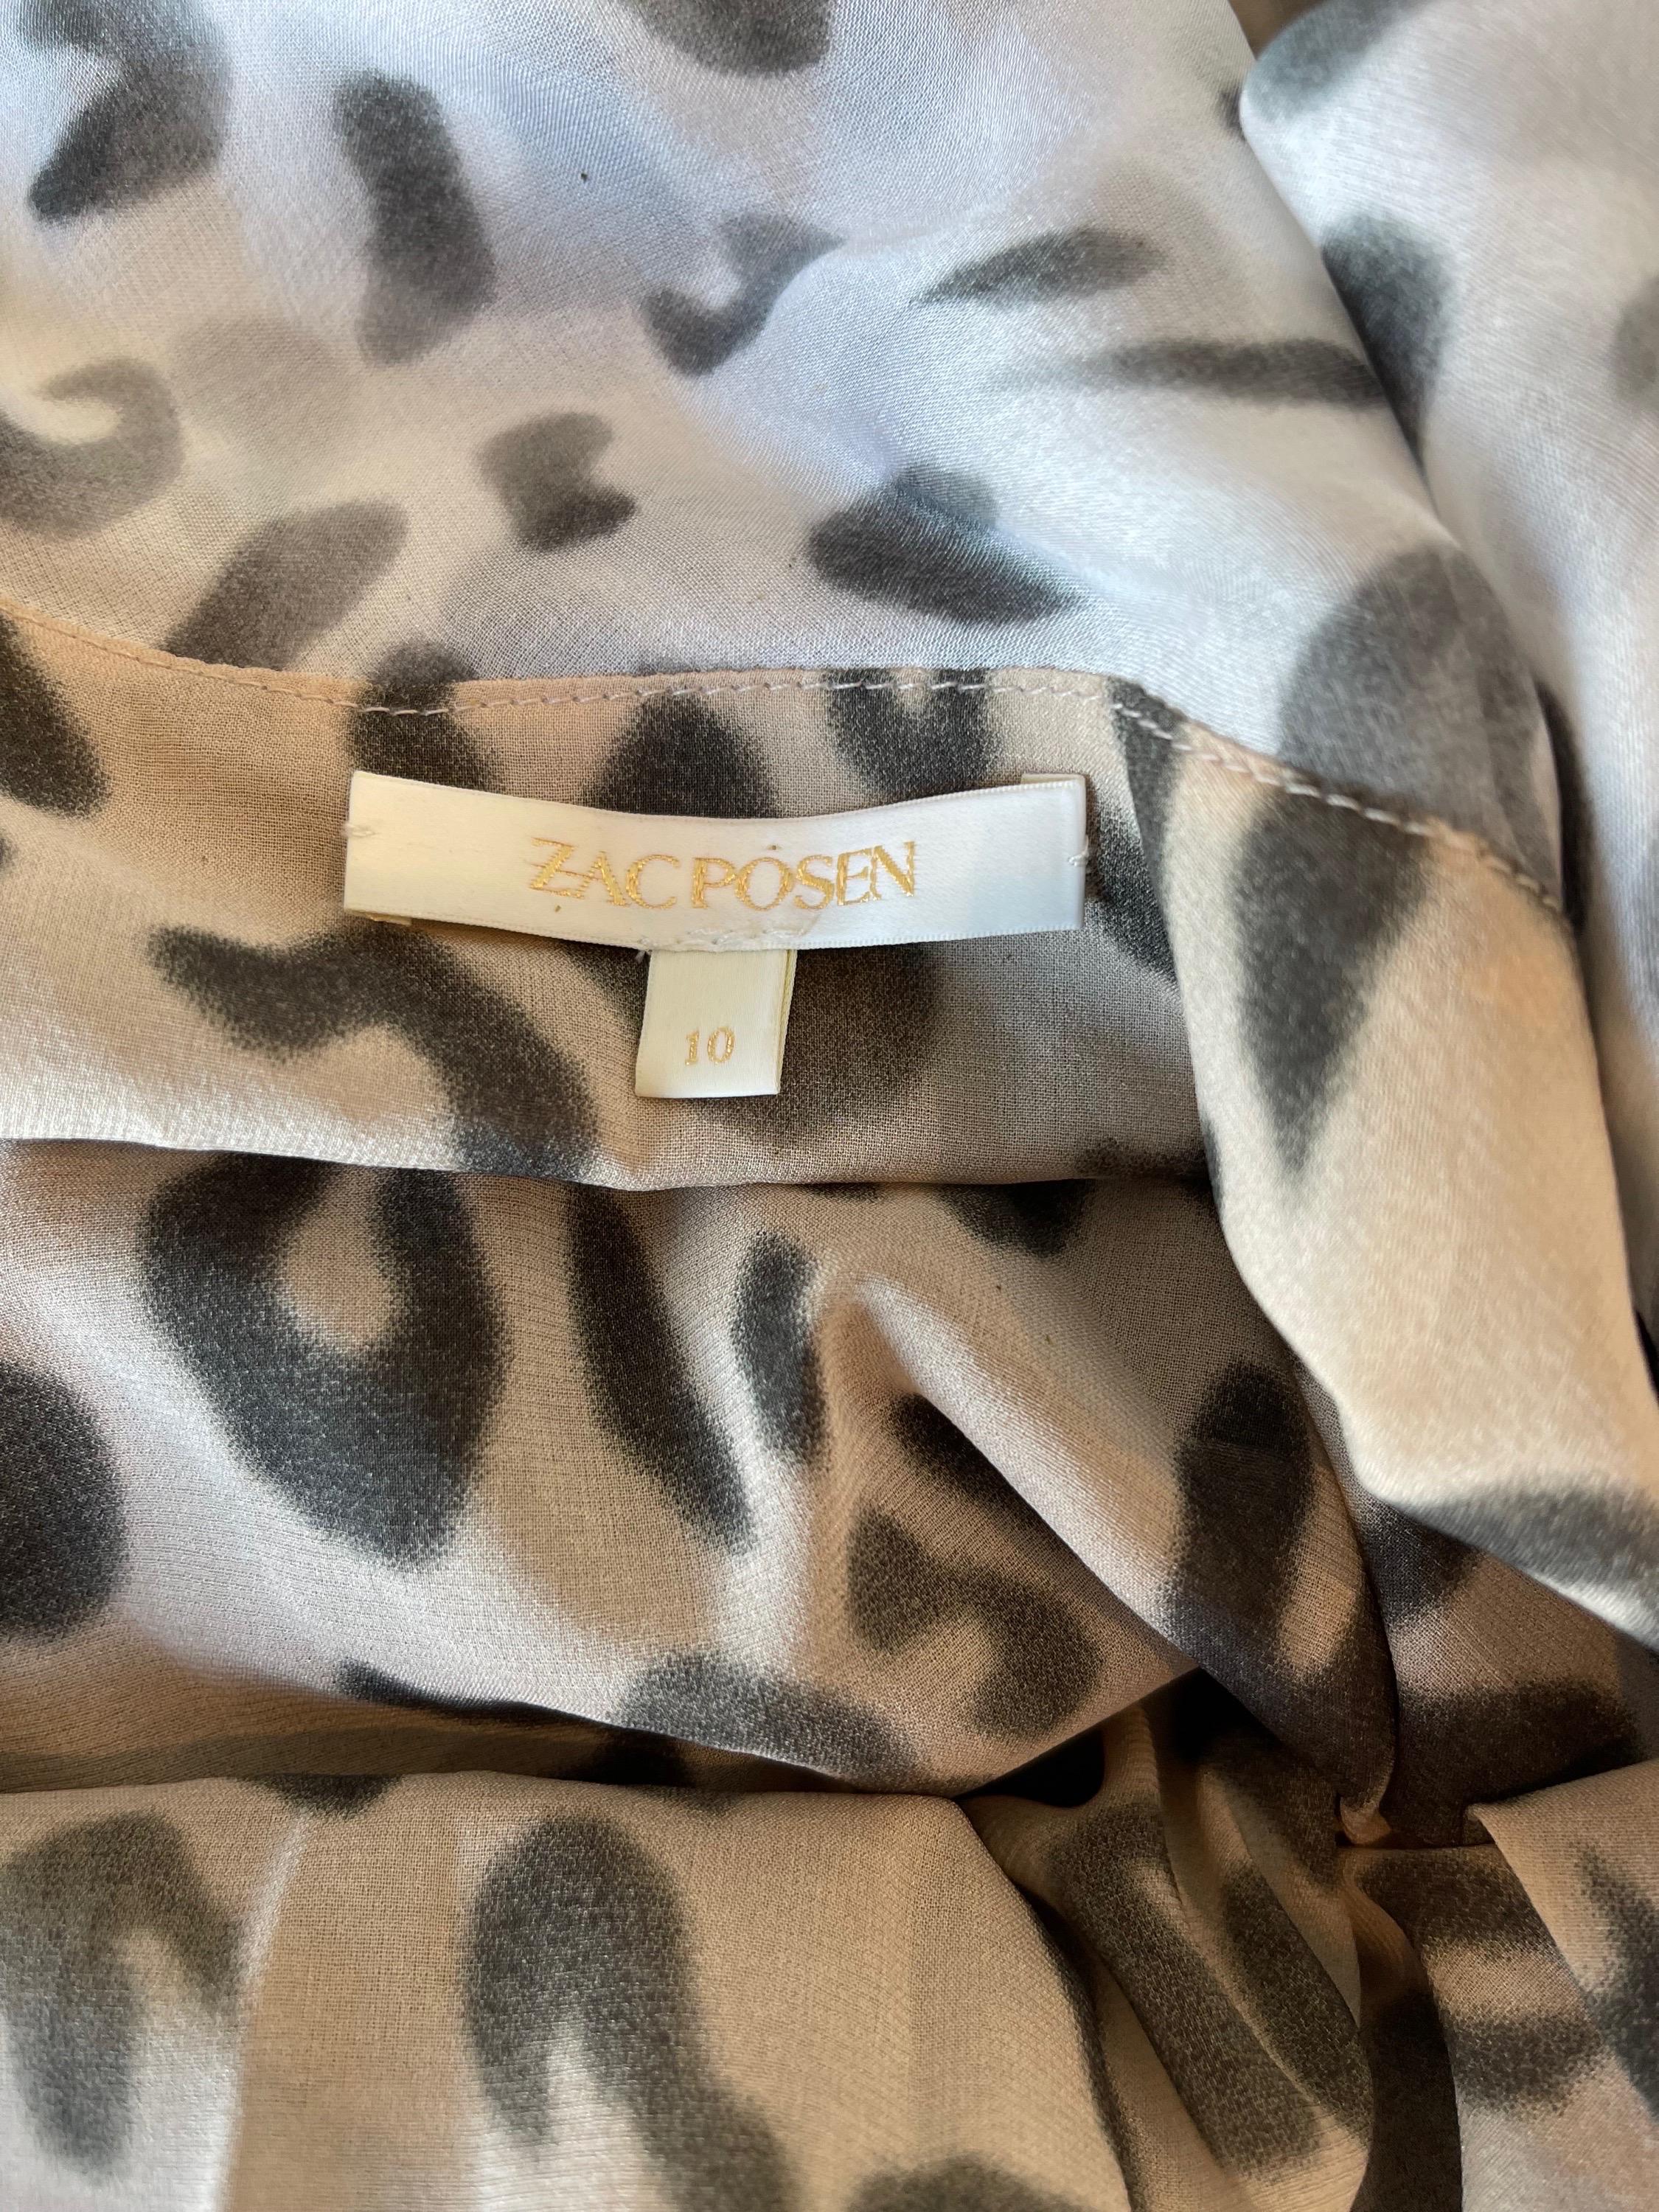 Chic ZAC POSEN Spring 2009 snow leopard print silk sleeveless shirt ! Features beautiful, flattering drapes with gray and white leopard spots. Simply slips on over the head. Can easily be dressed up or down. Pair with jeans or shorts for day, or